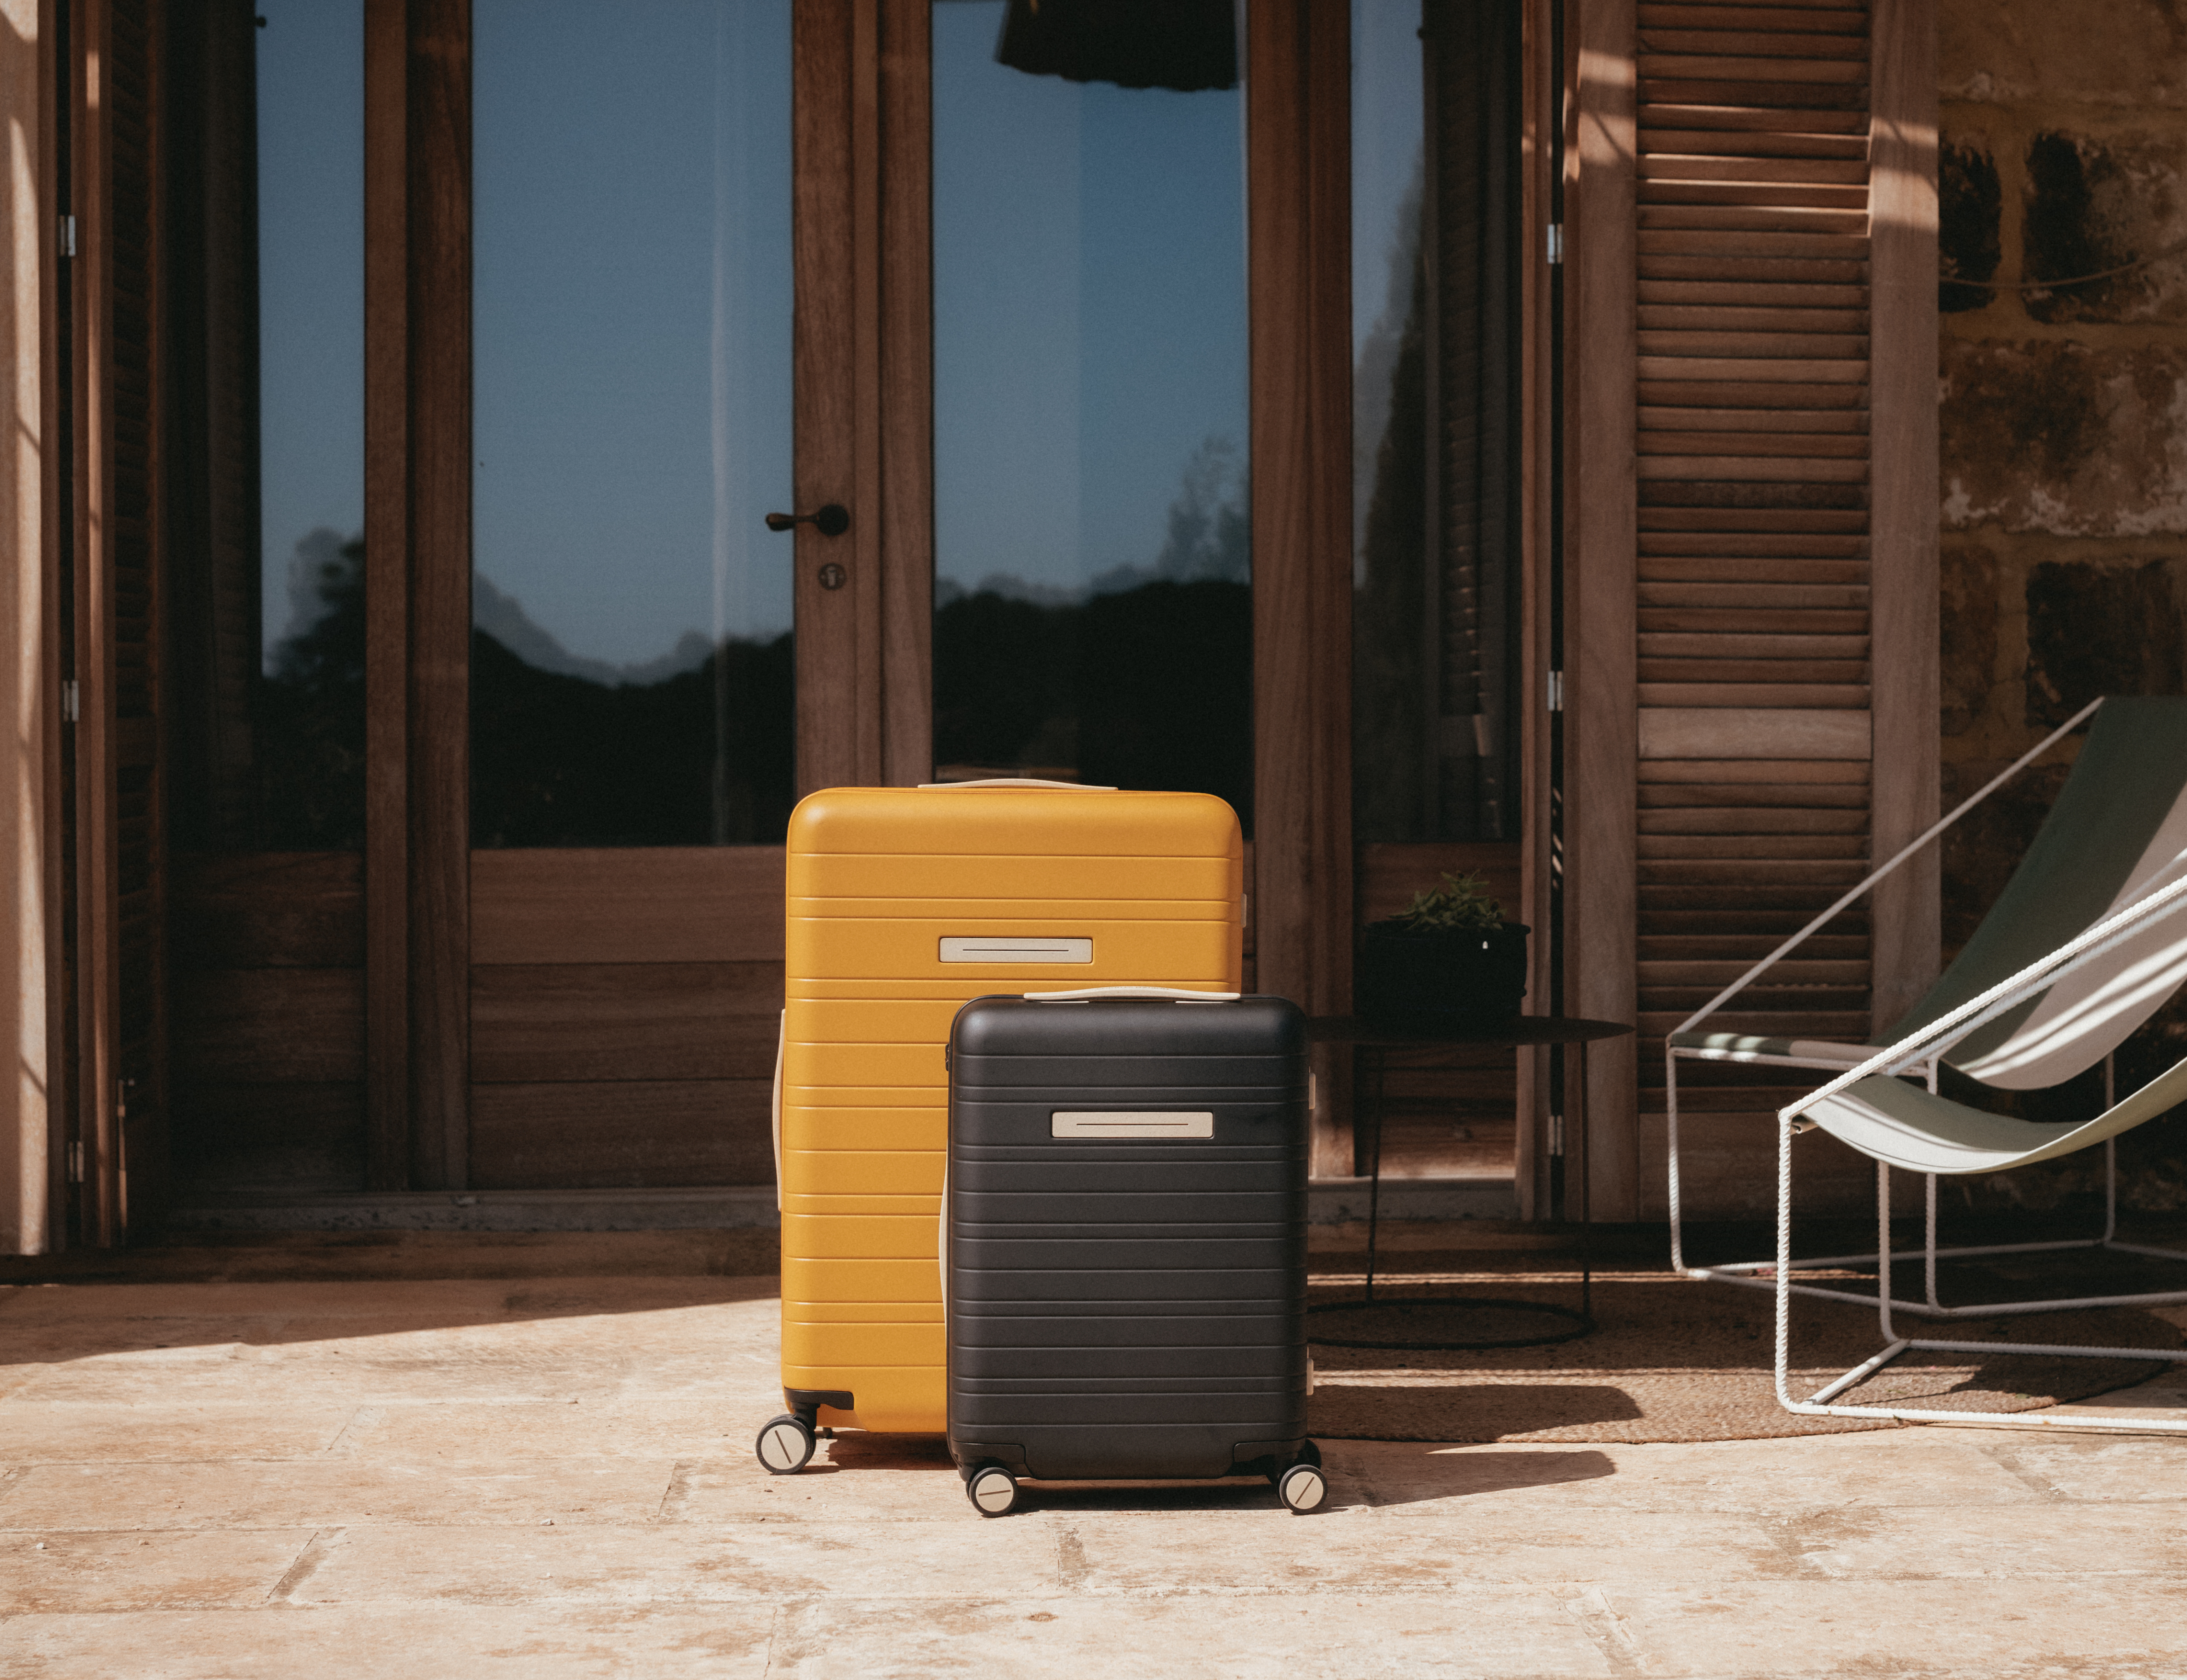 Thought A Suitcase Couldn’t Change The World? Think Again.